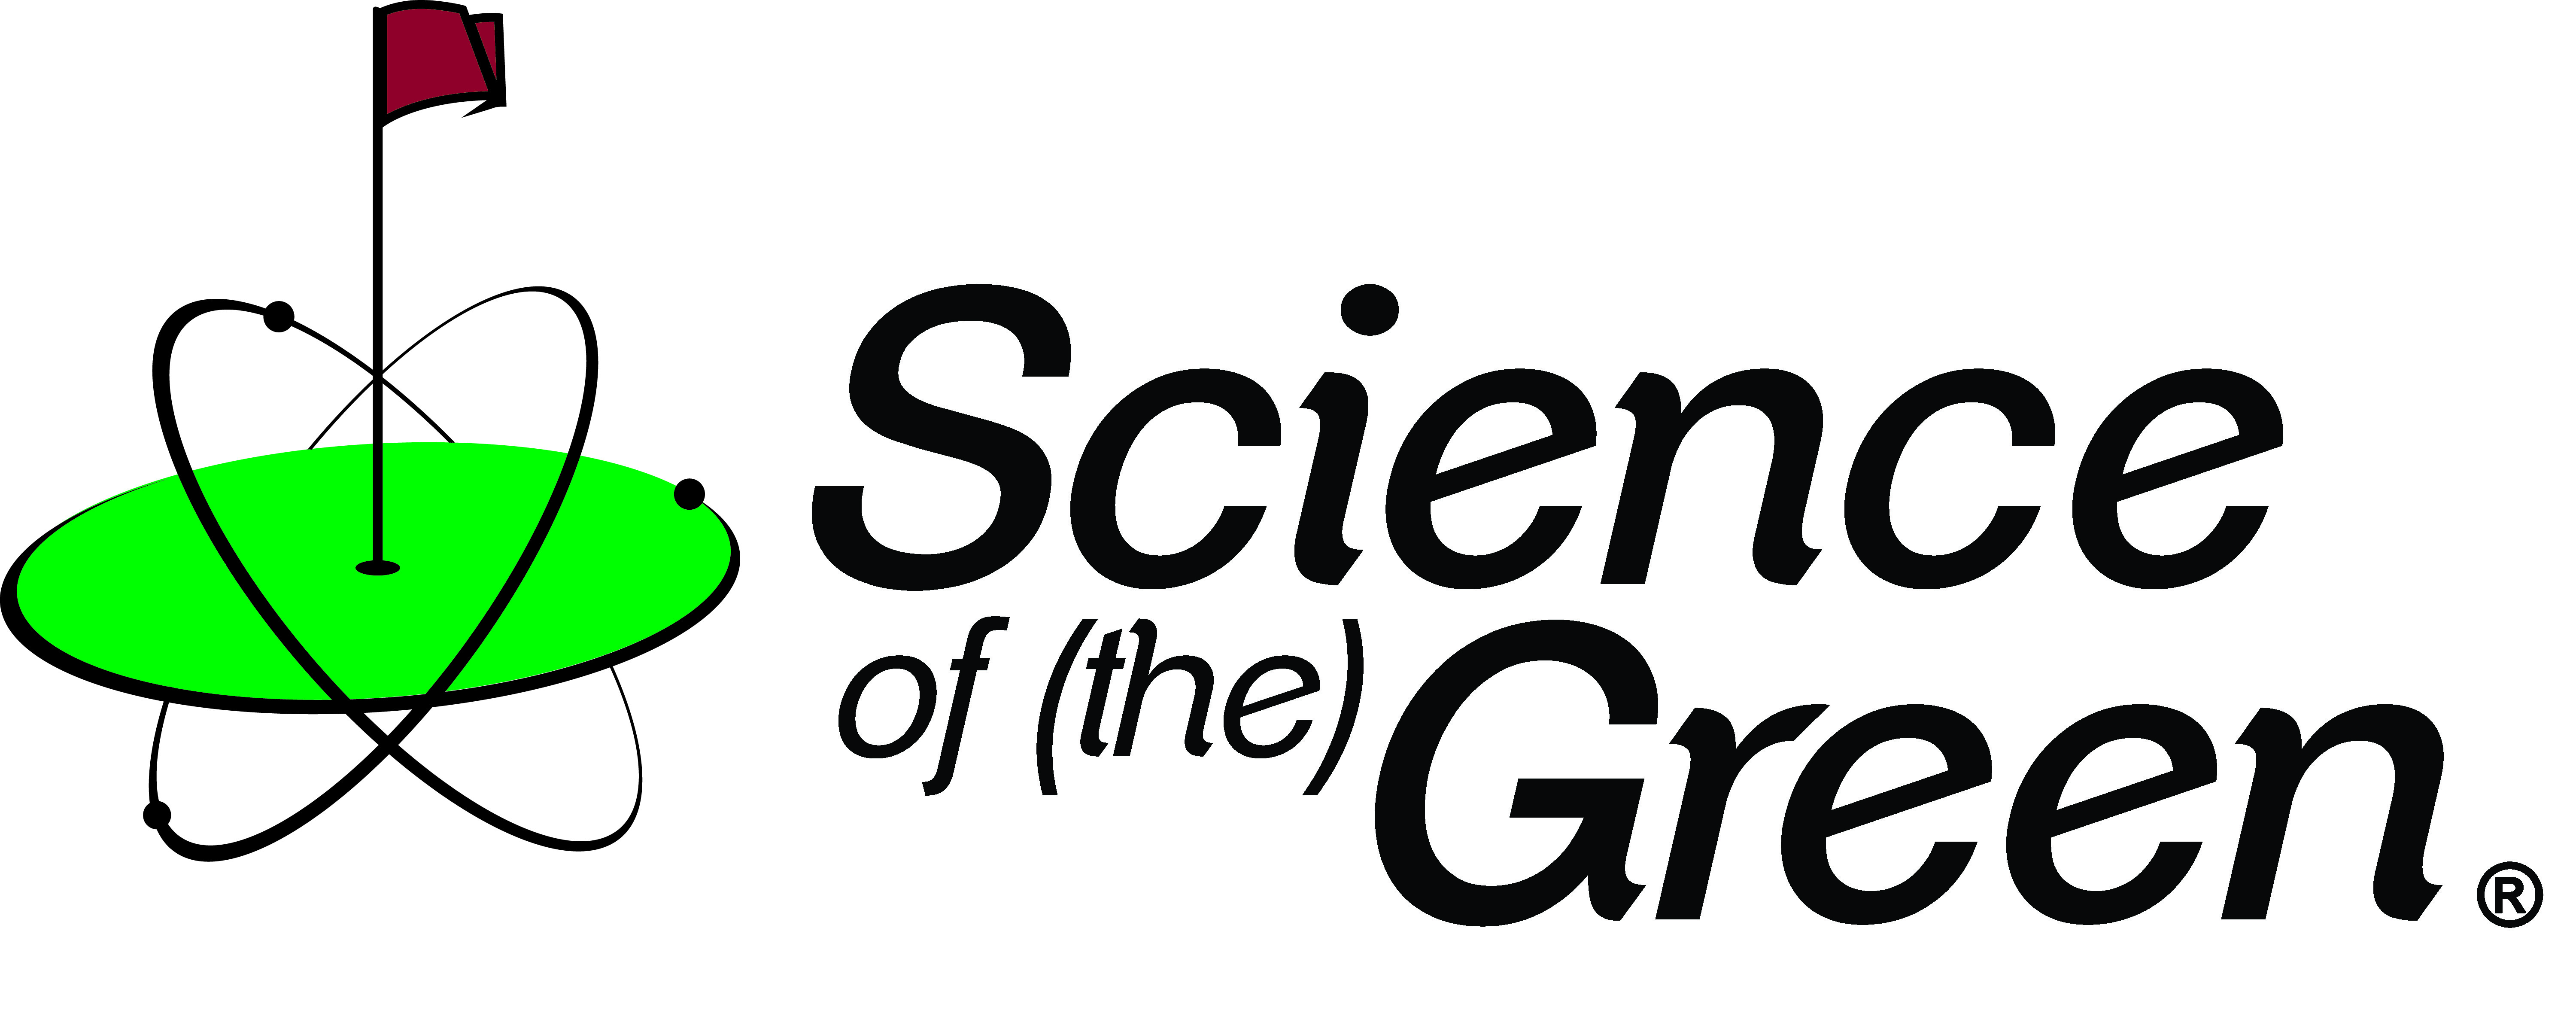 Science of the Green | An Opportunity for Golf's Future